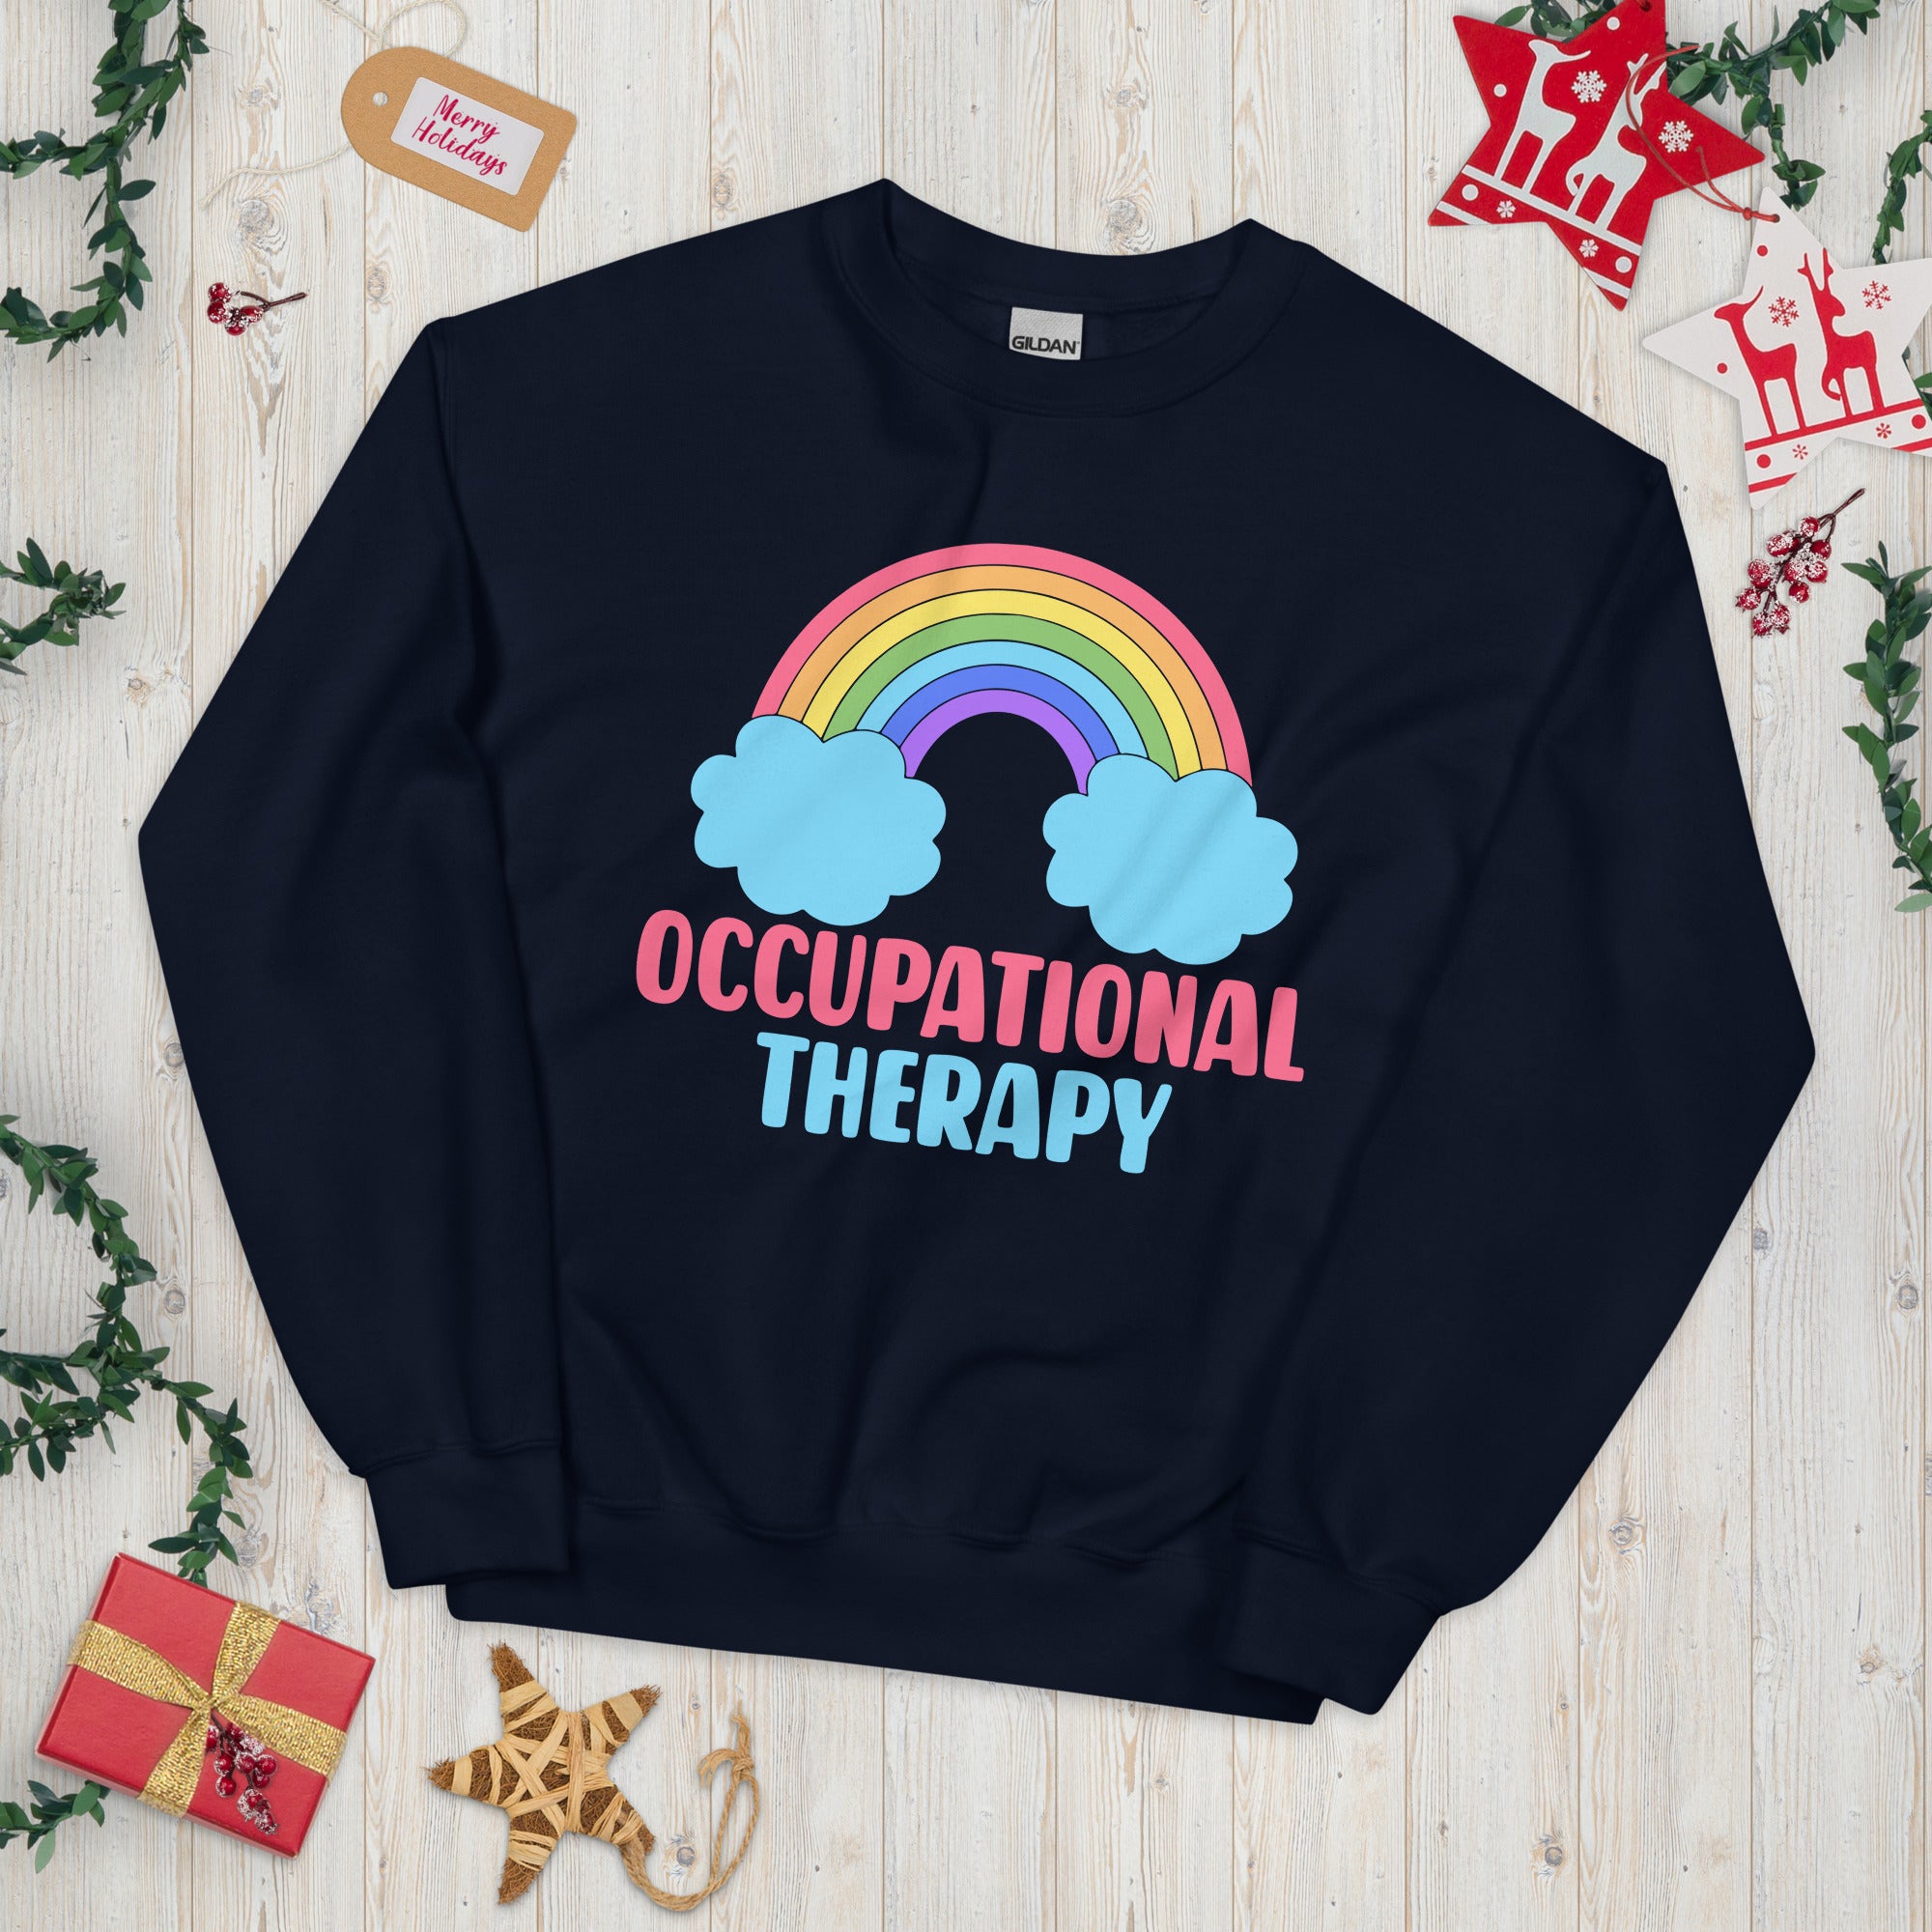 Occupational Therapy Sweatshirt, Occupational Therapy, OT Shirt, OTA Shirt, Occupational Therapy Gifts, Occupational Therapy Assistant - Madeinsea©